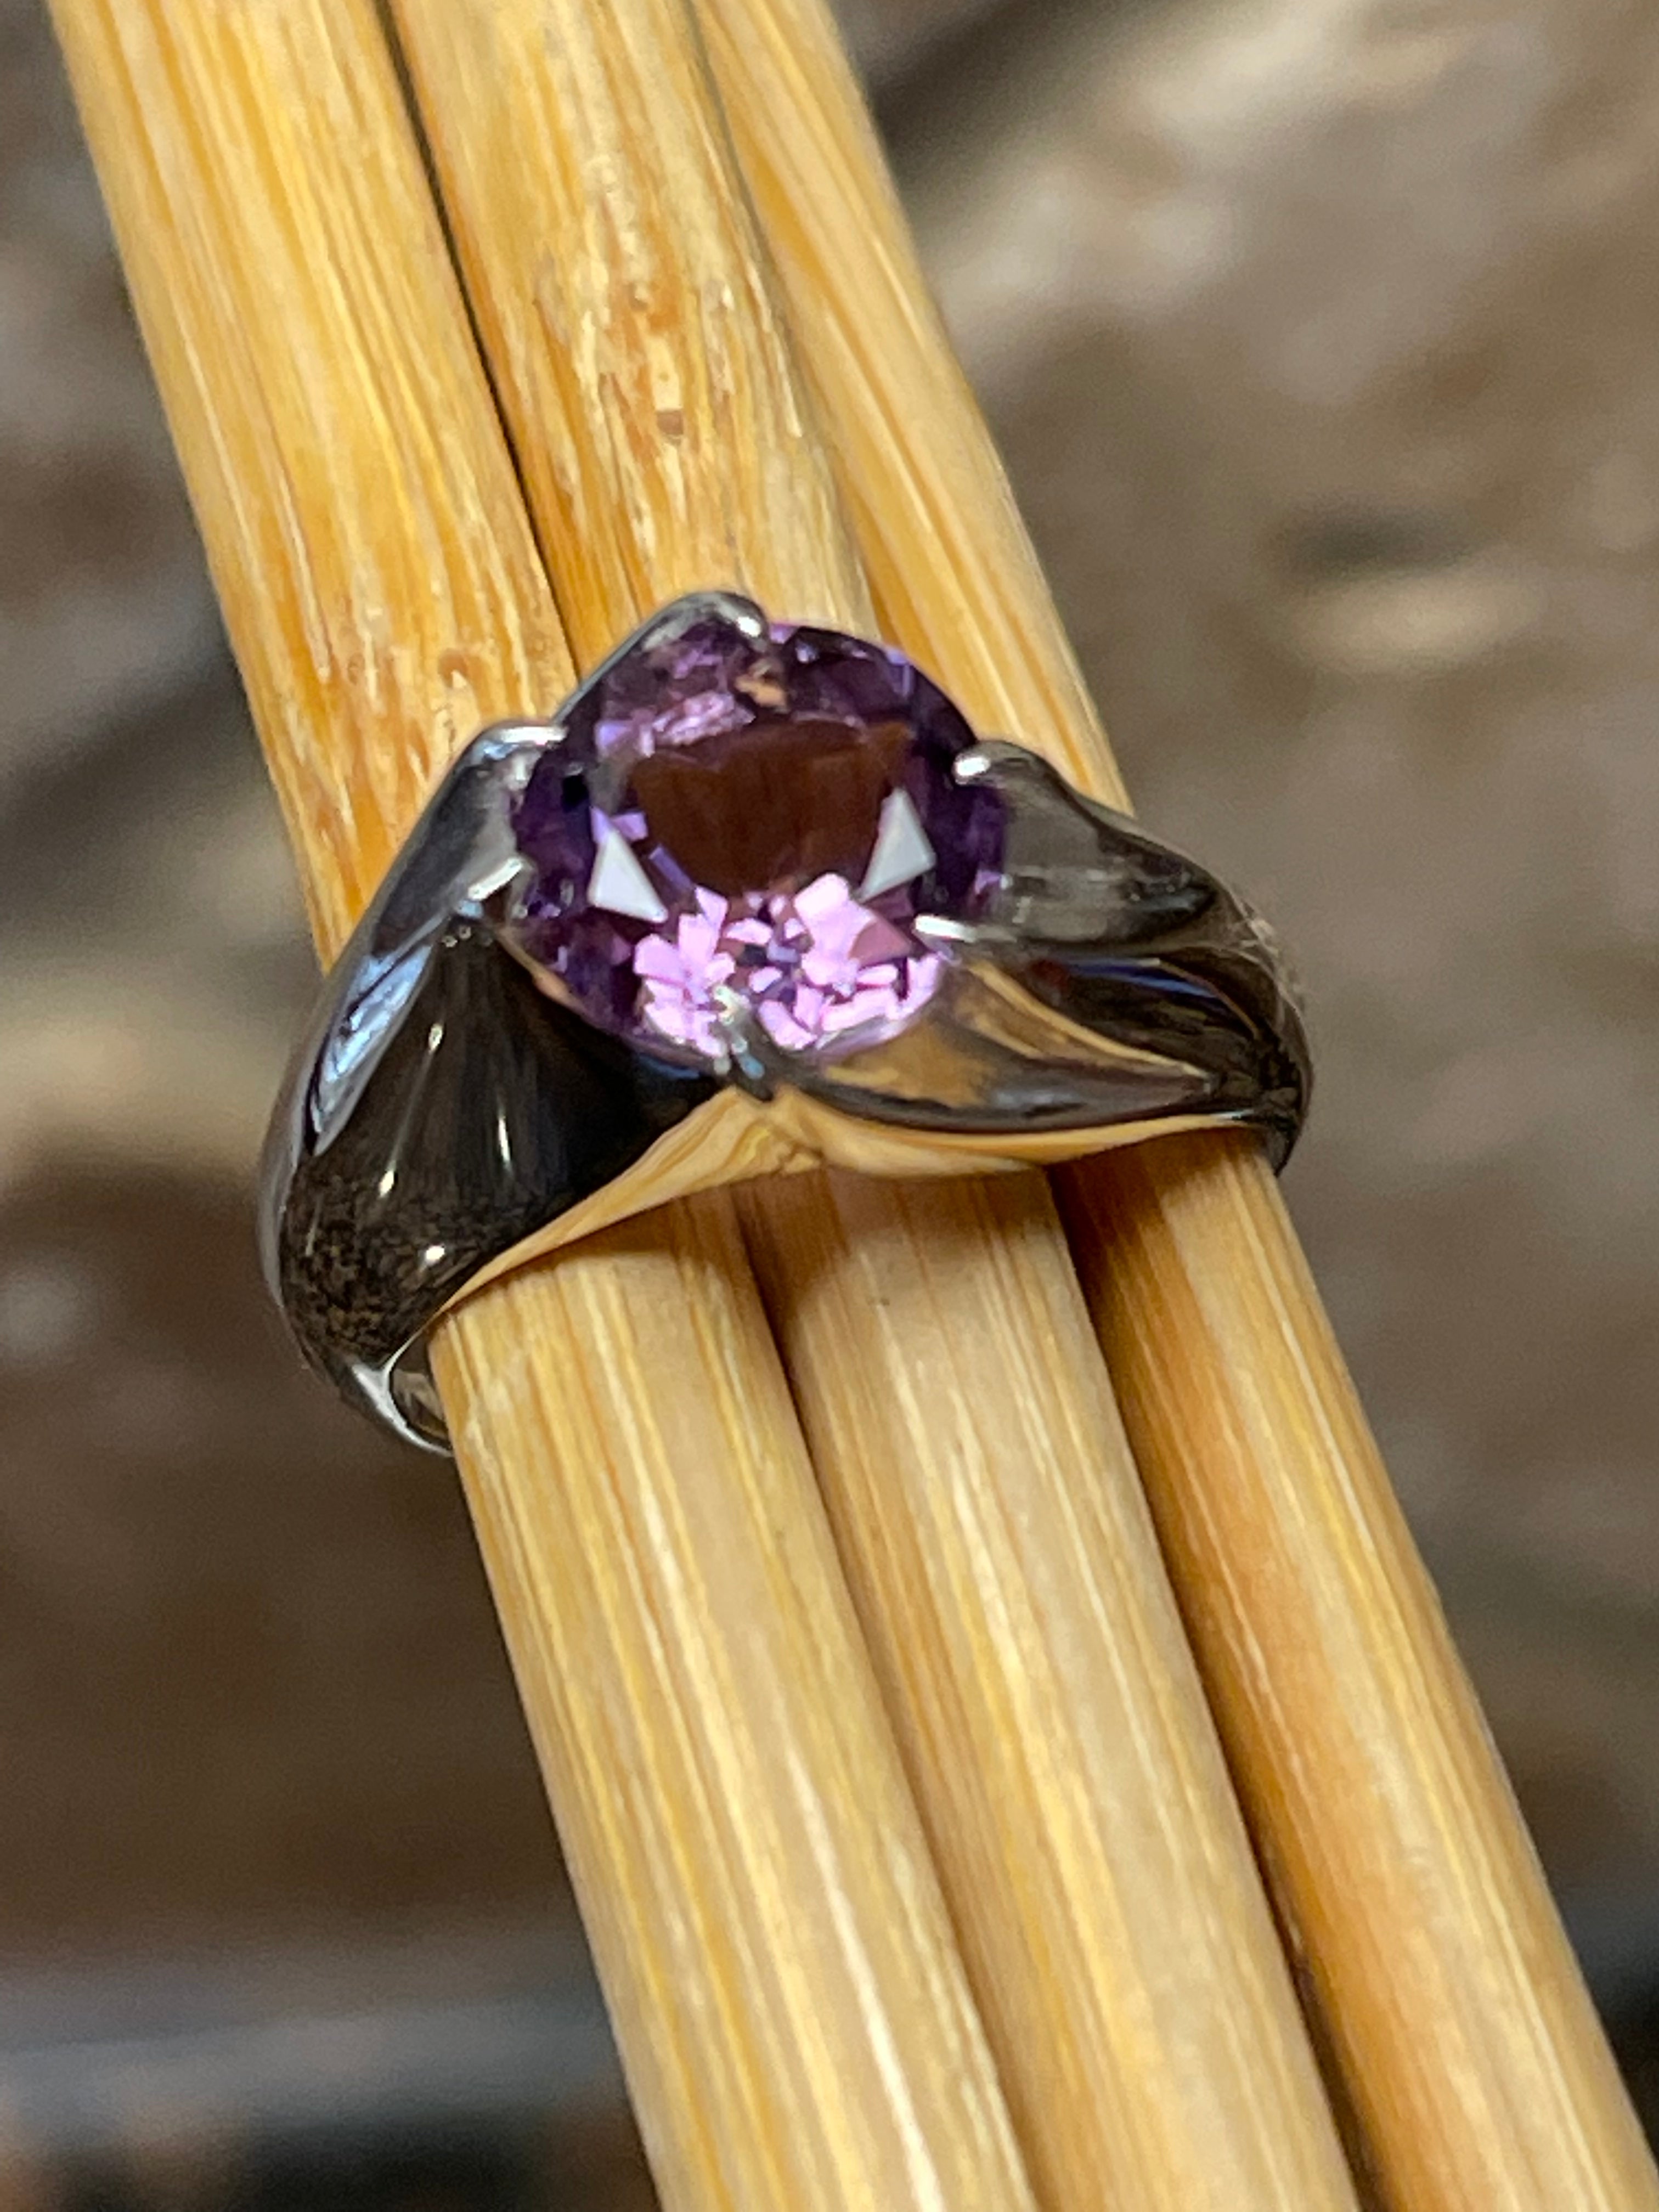 Natural 2ct Purple Amethyst 925 Solid Sterling Silver Ring Size 5, 6, 7, 8, 9 - Natural Rocks by Kala